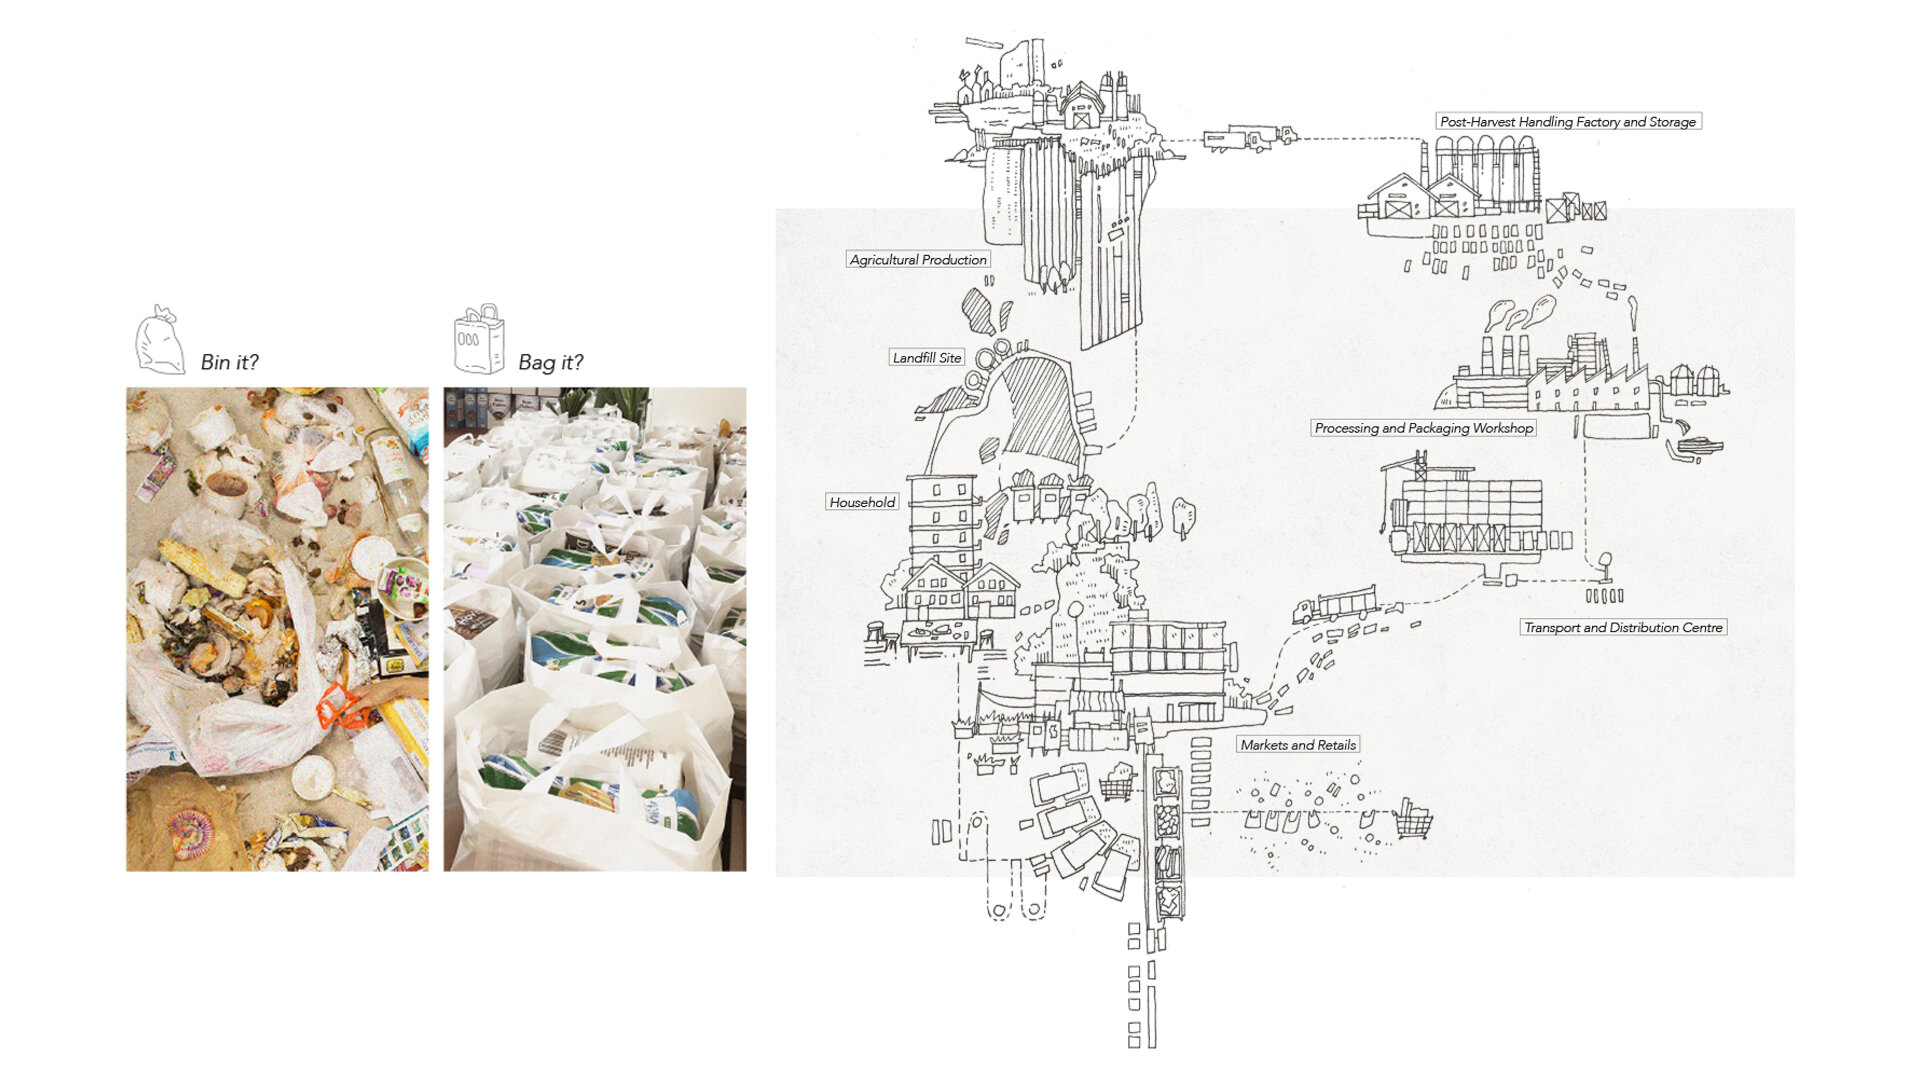 Productive Landscape - Regent’s Park Food Community_Meiying Hong_MArch Year 5, Bartlett School of Architecture, UCL 1.jpg